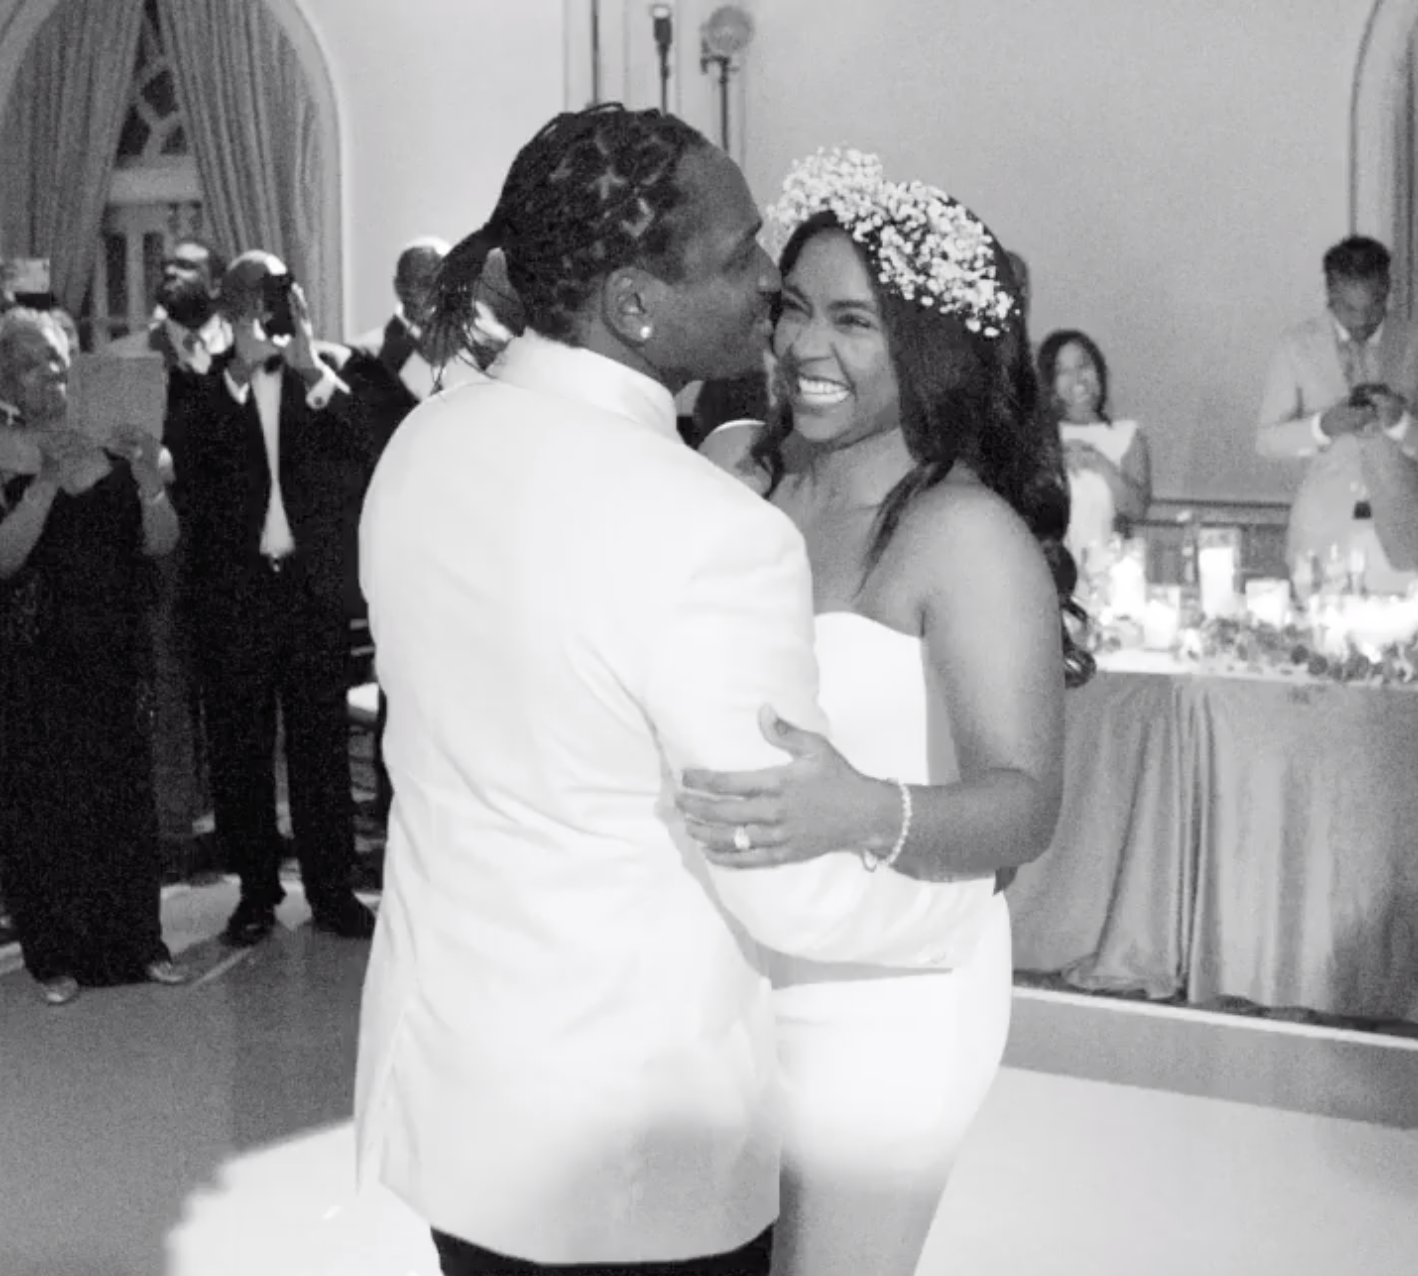 Pusha T and Wife Virginia Williams Are Expecting Their First Child Together